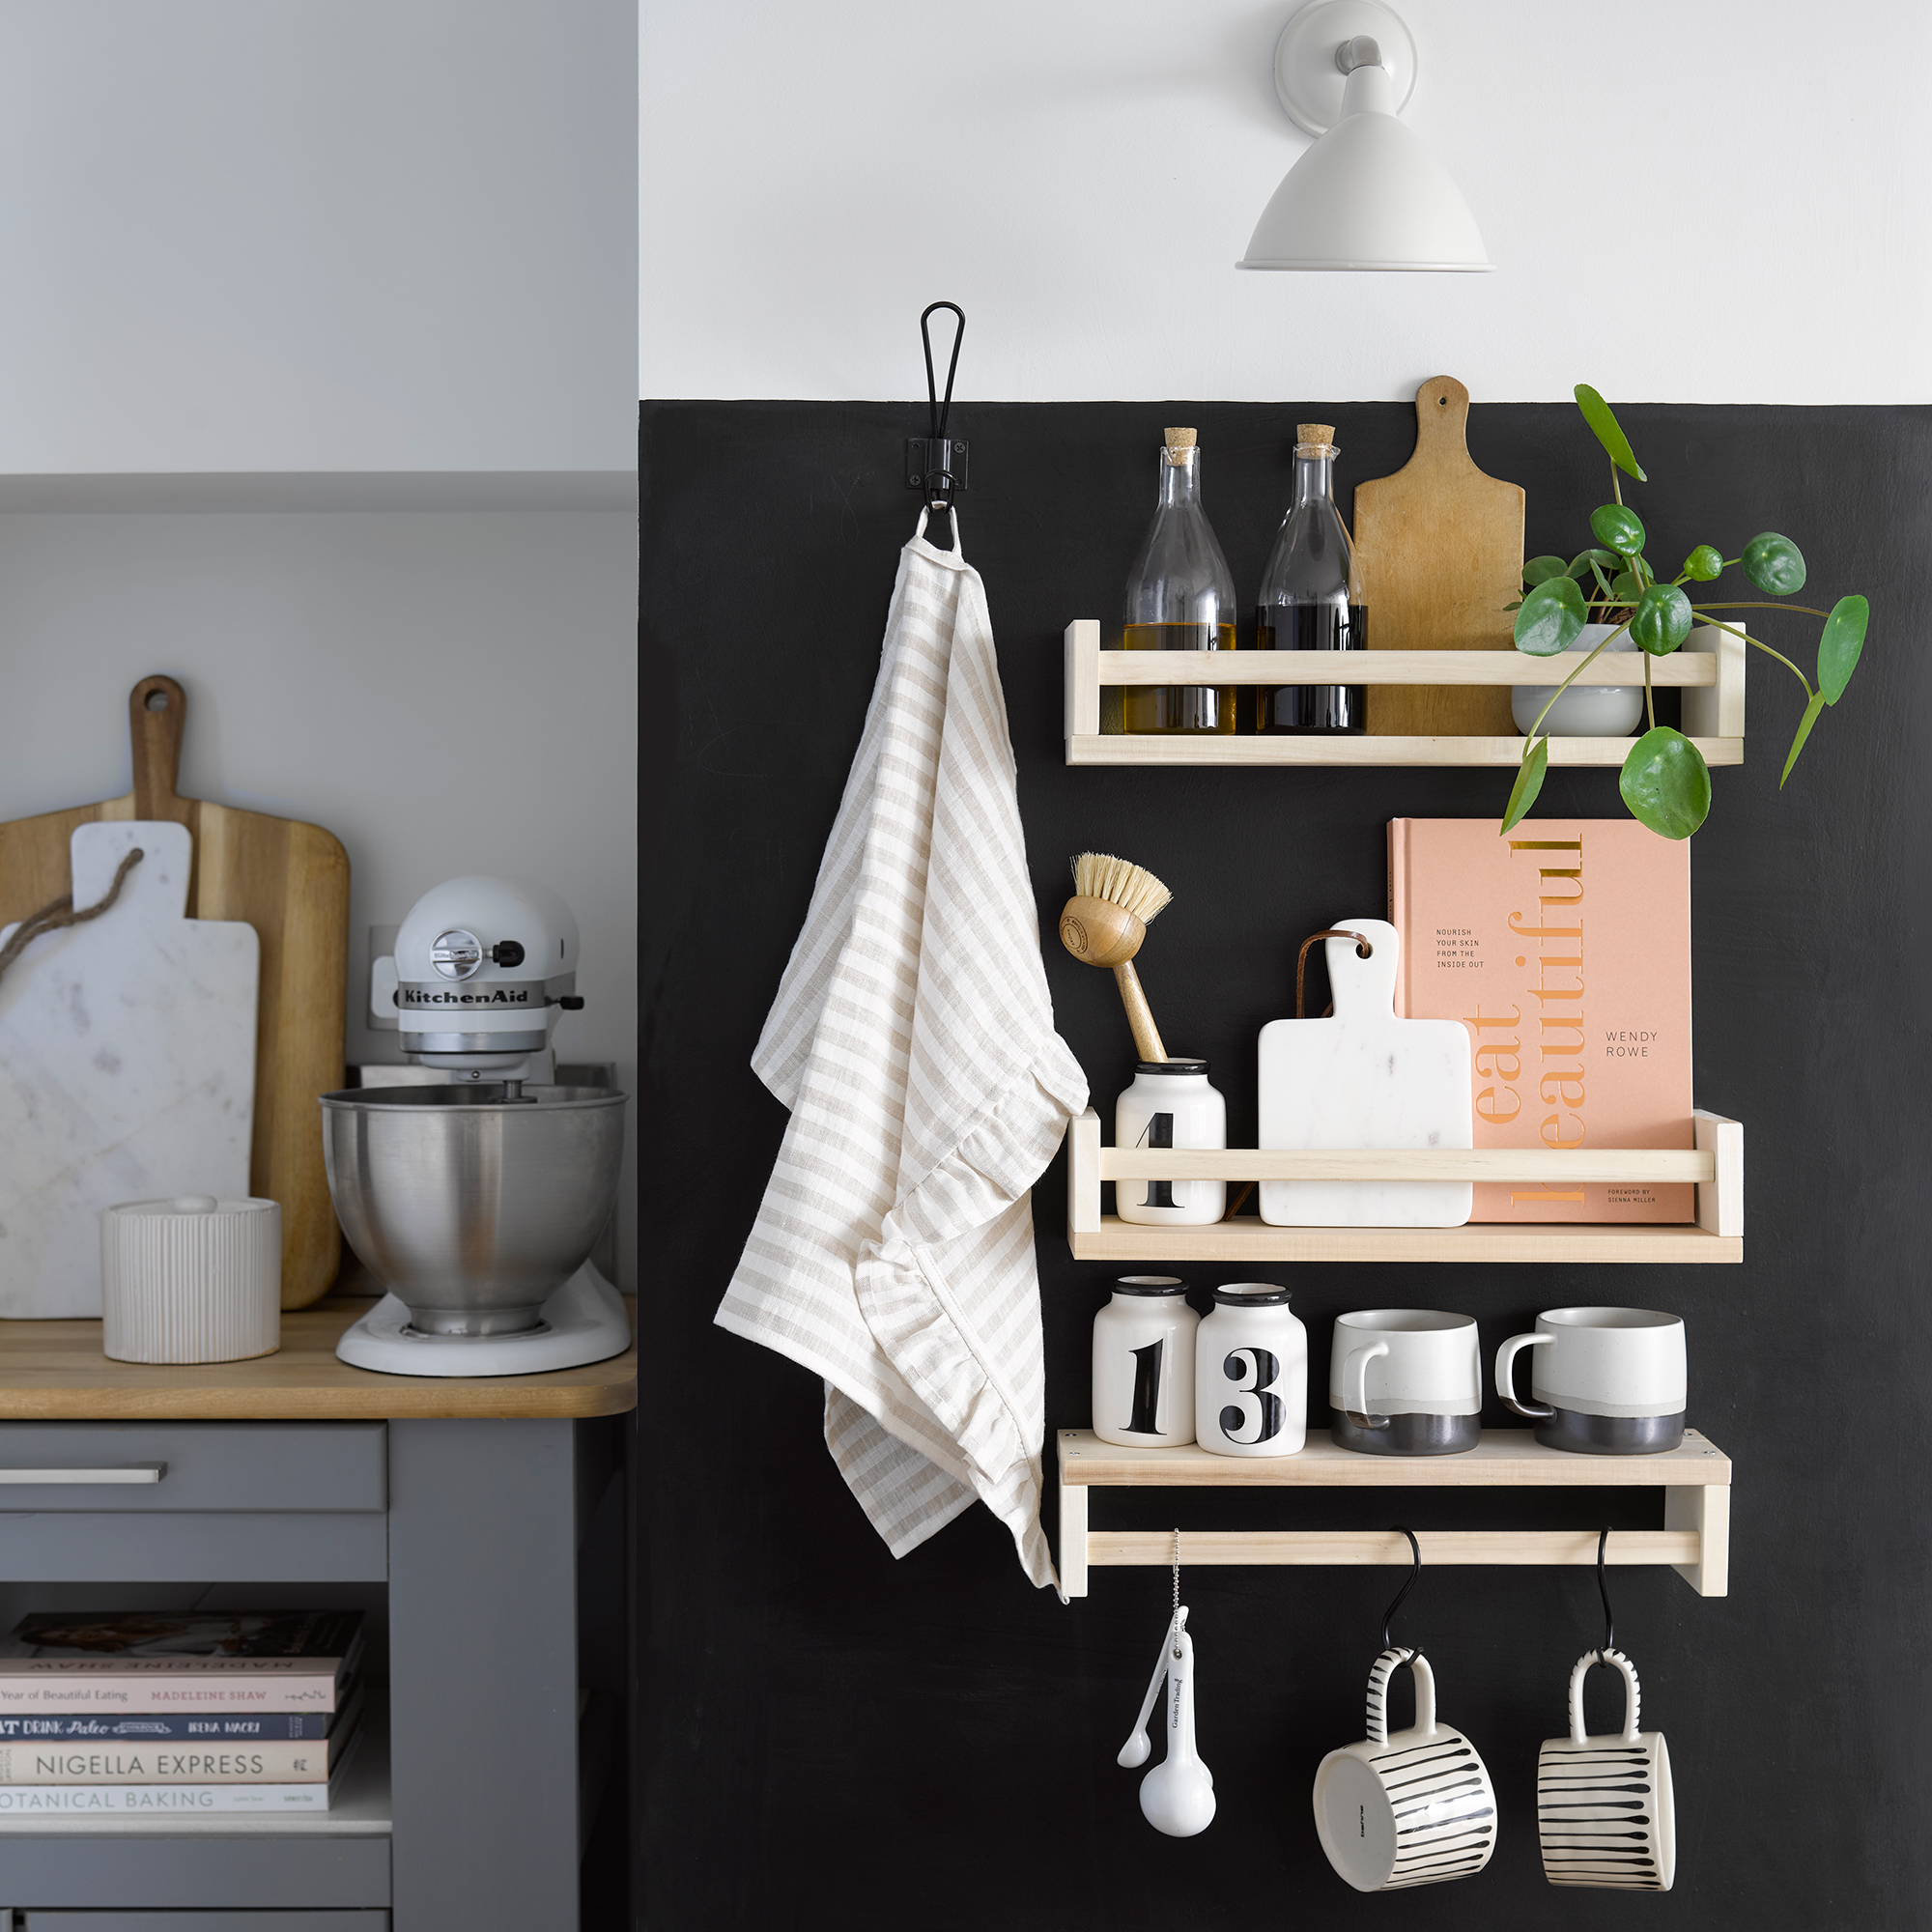 This Space-Saving Spice Rack and Paper Towel Holder Is Editor-Approved